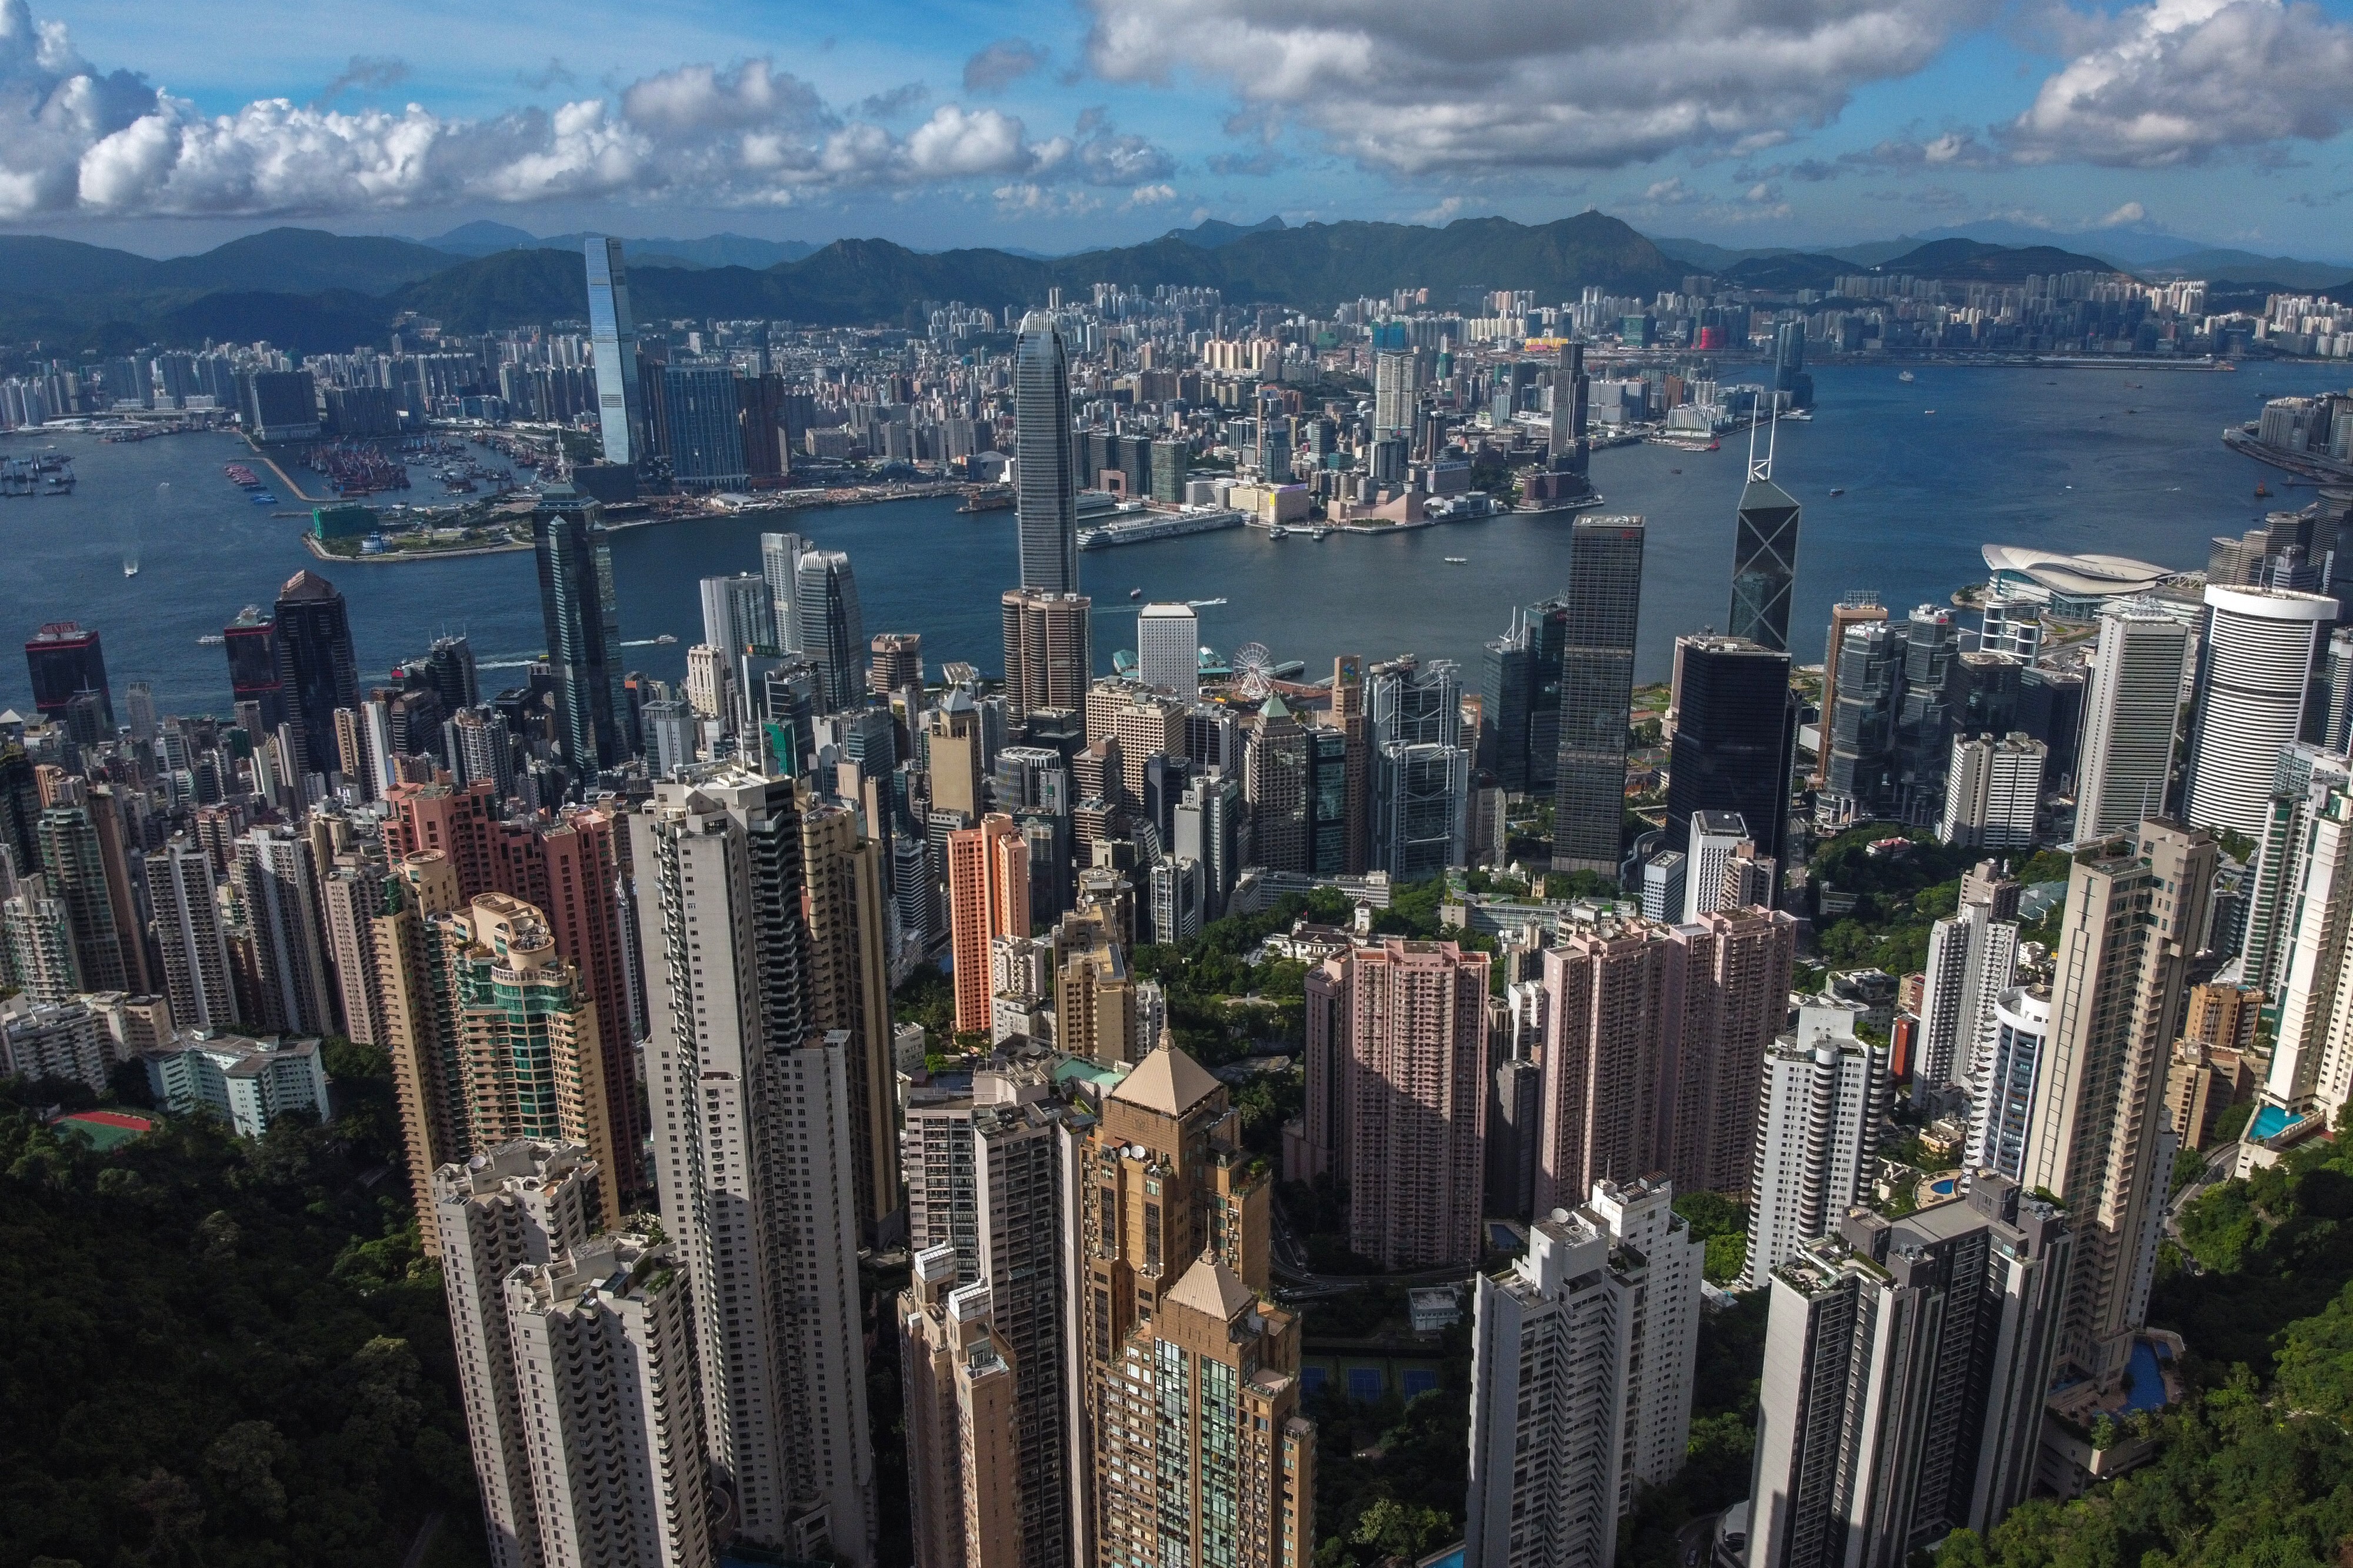 Highly skilled mainland Chinese residents have been coming to Hong Kong, but many will not stay long, a study has found. Photo: Sun Yeung